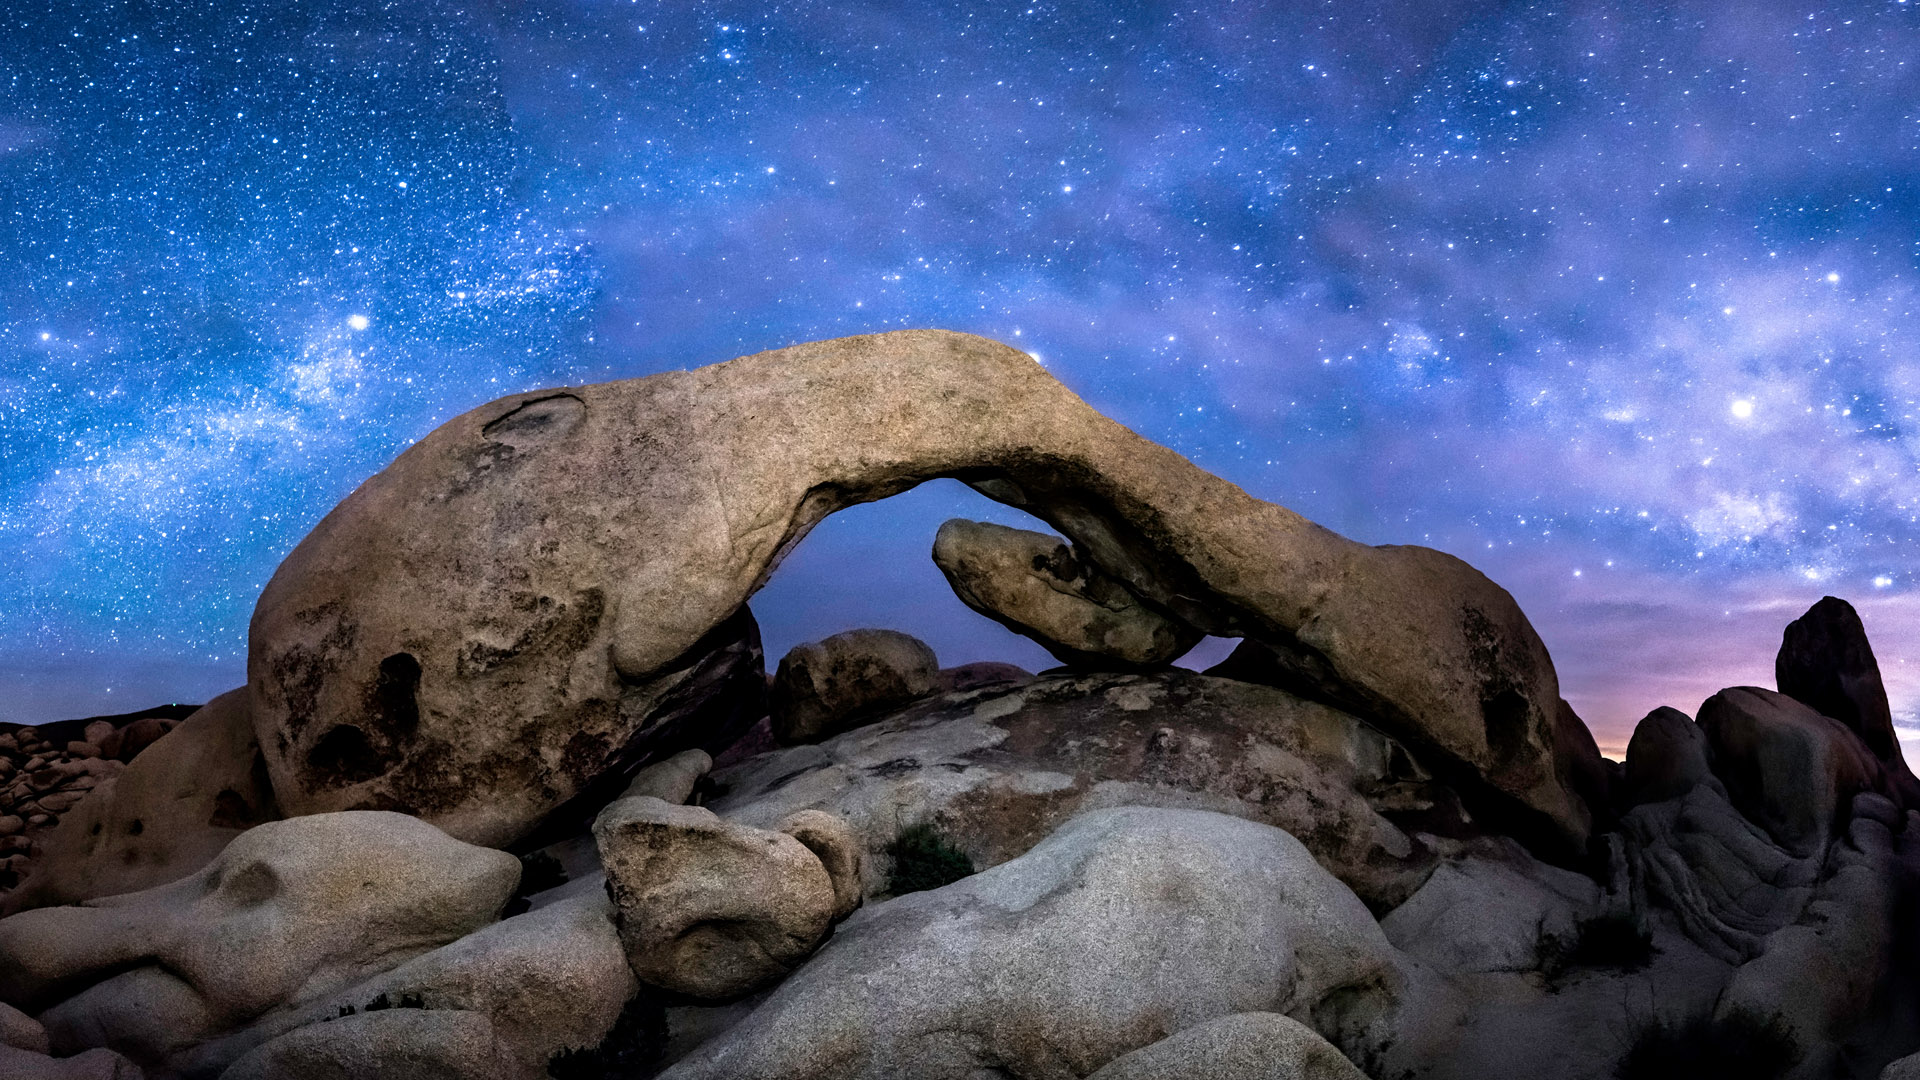 The Milky Way formed over Arch Rock in Joshua Tree National Park ...